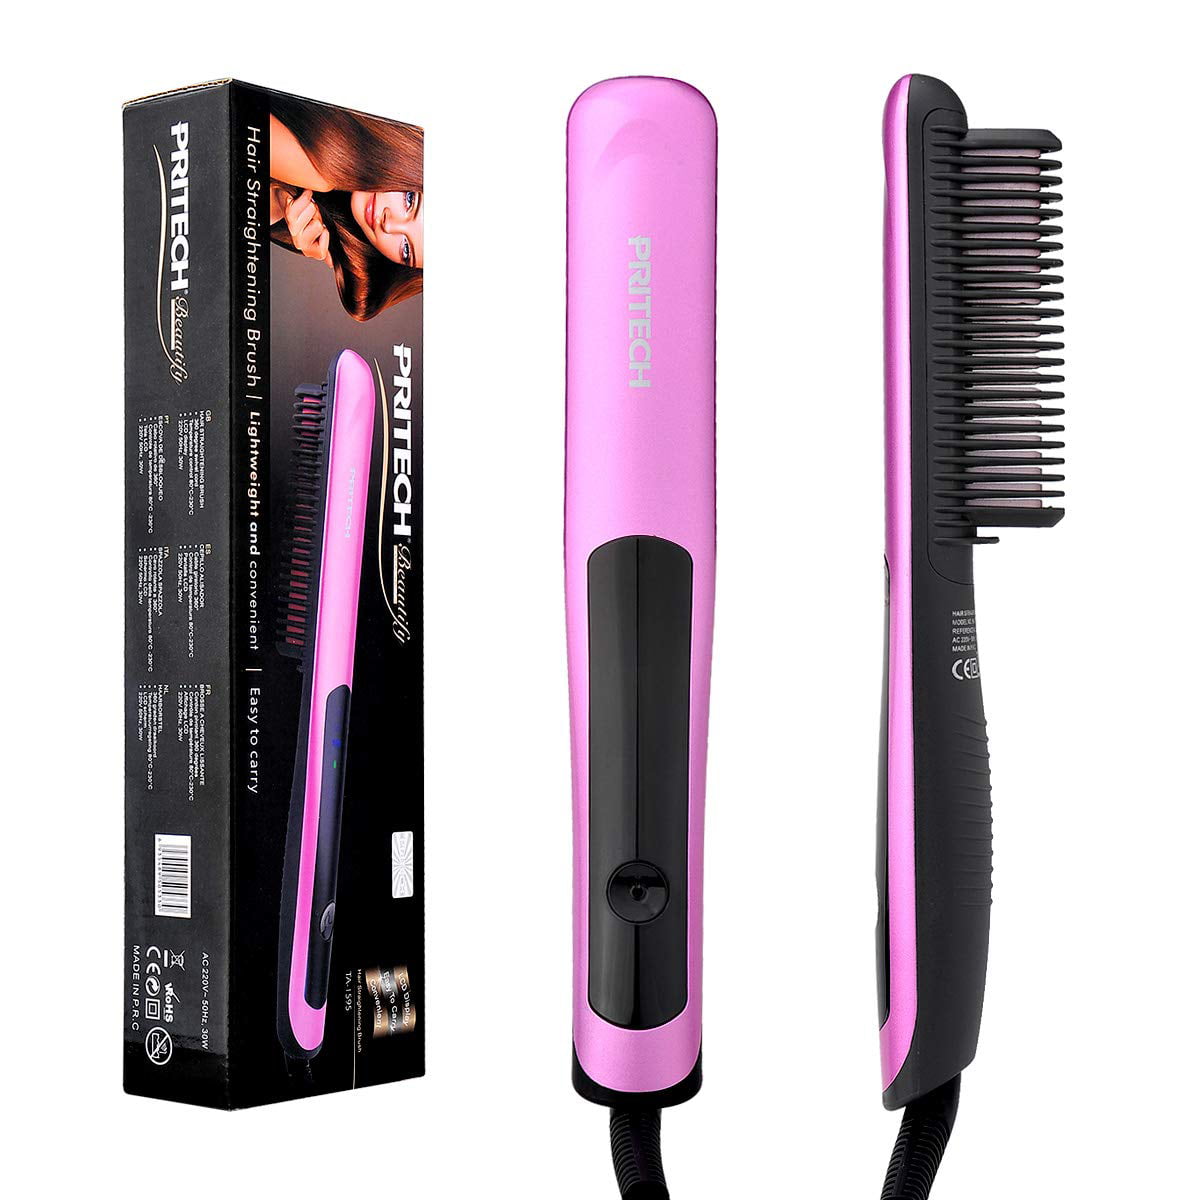 Eternity Hair Brush Fast Hair Straightener Comb Hair Electric Brush Comb  Irons Auto Straight Hair Comb Brush ETR28b  Price history  Review   AliExpress Seller  VERY ETERNITY Store  Alitoolsio